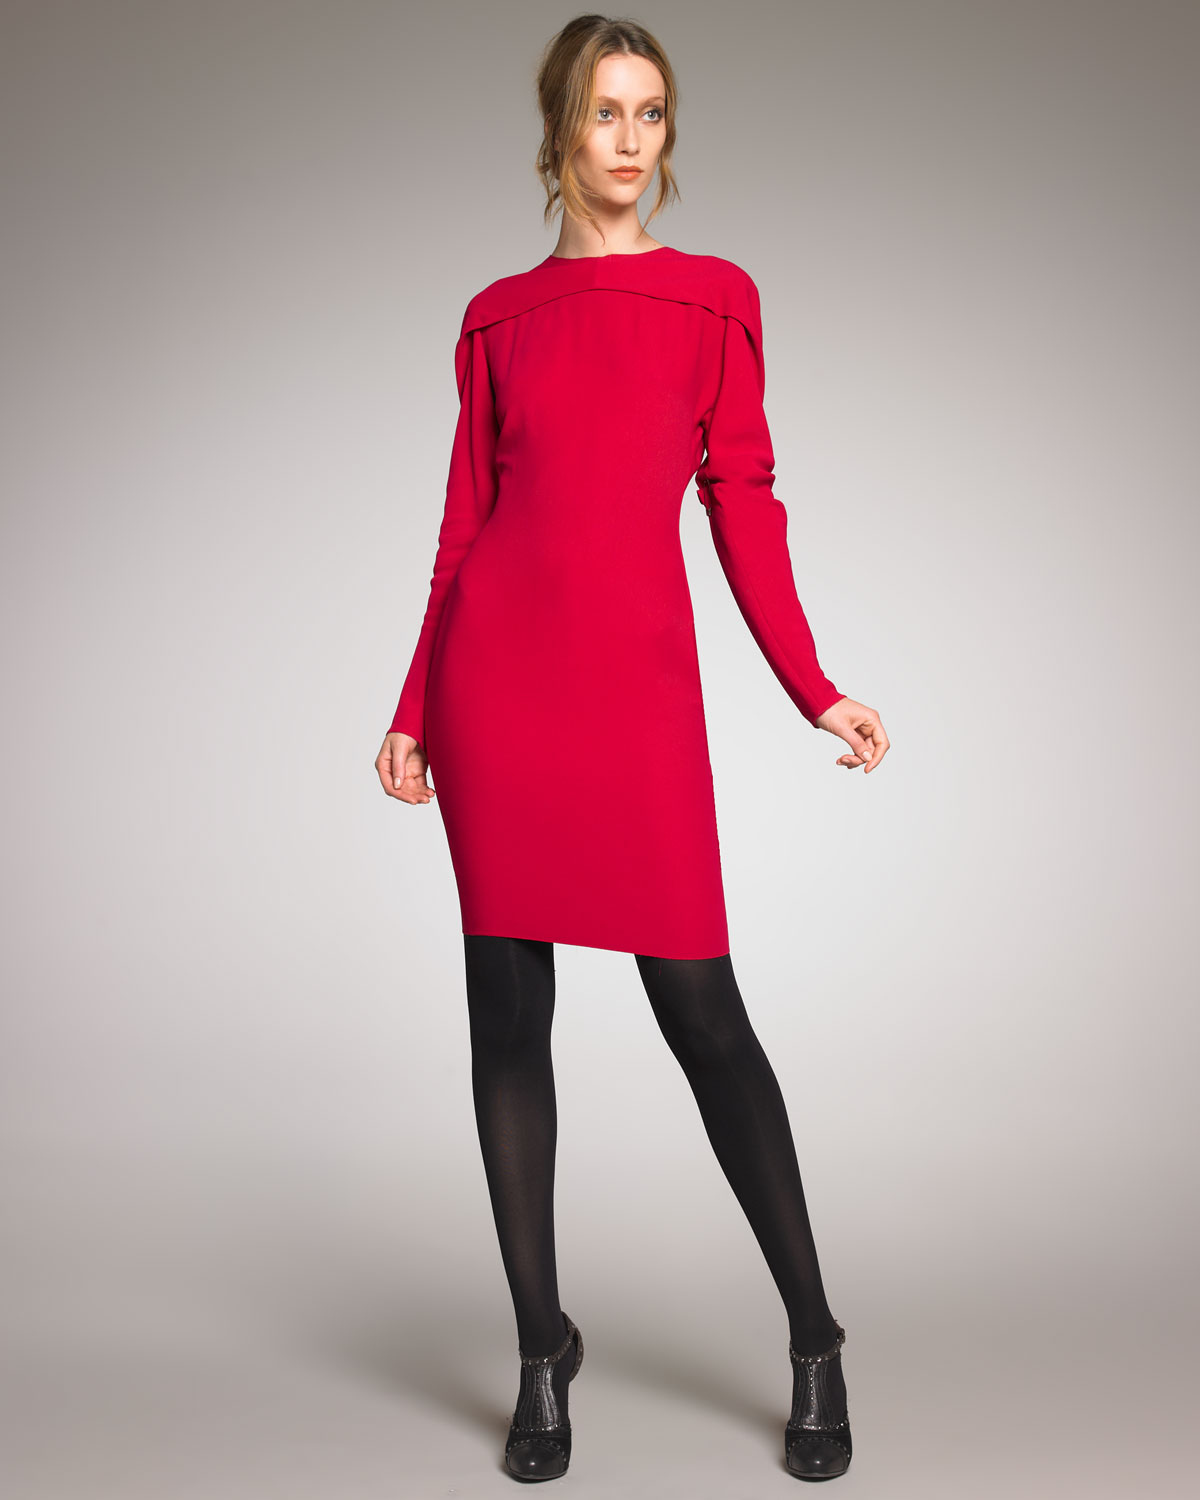 Collection Long Sleeve Sheath Dress Pictures - Reikian